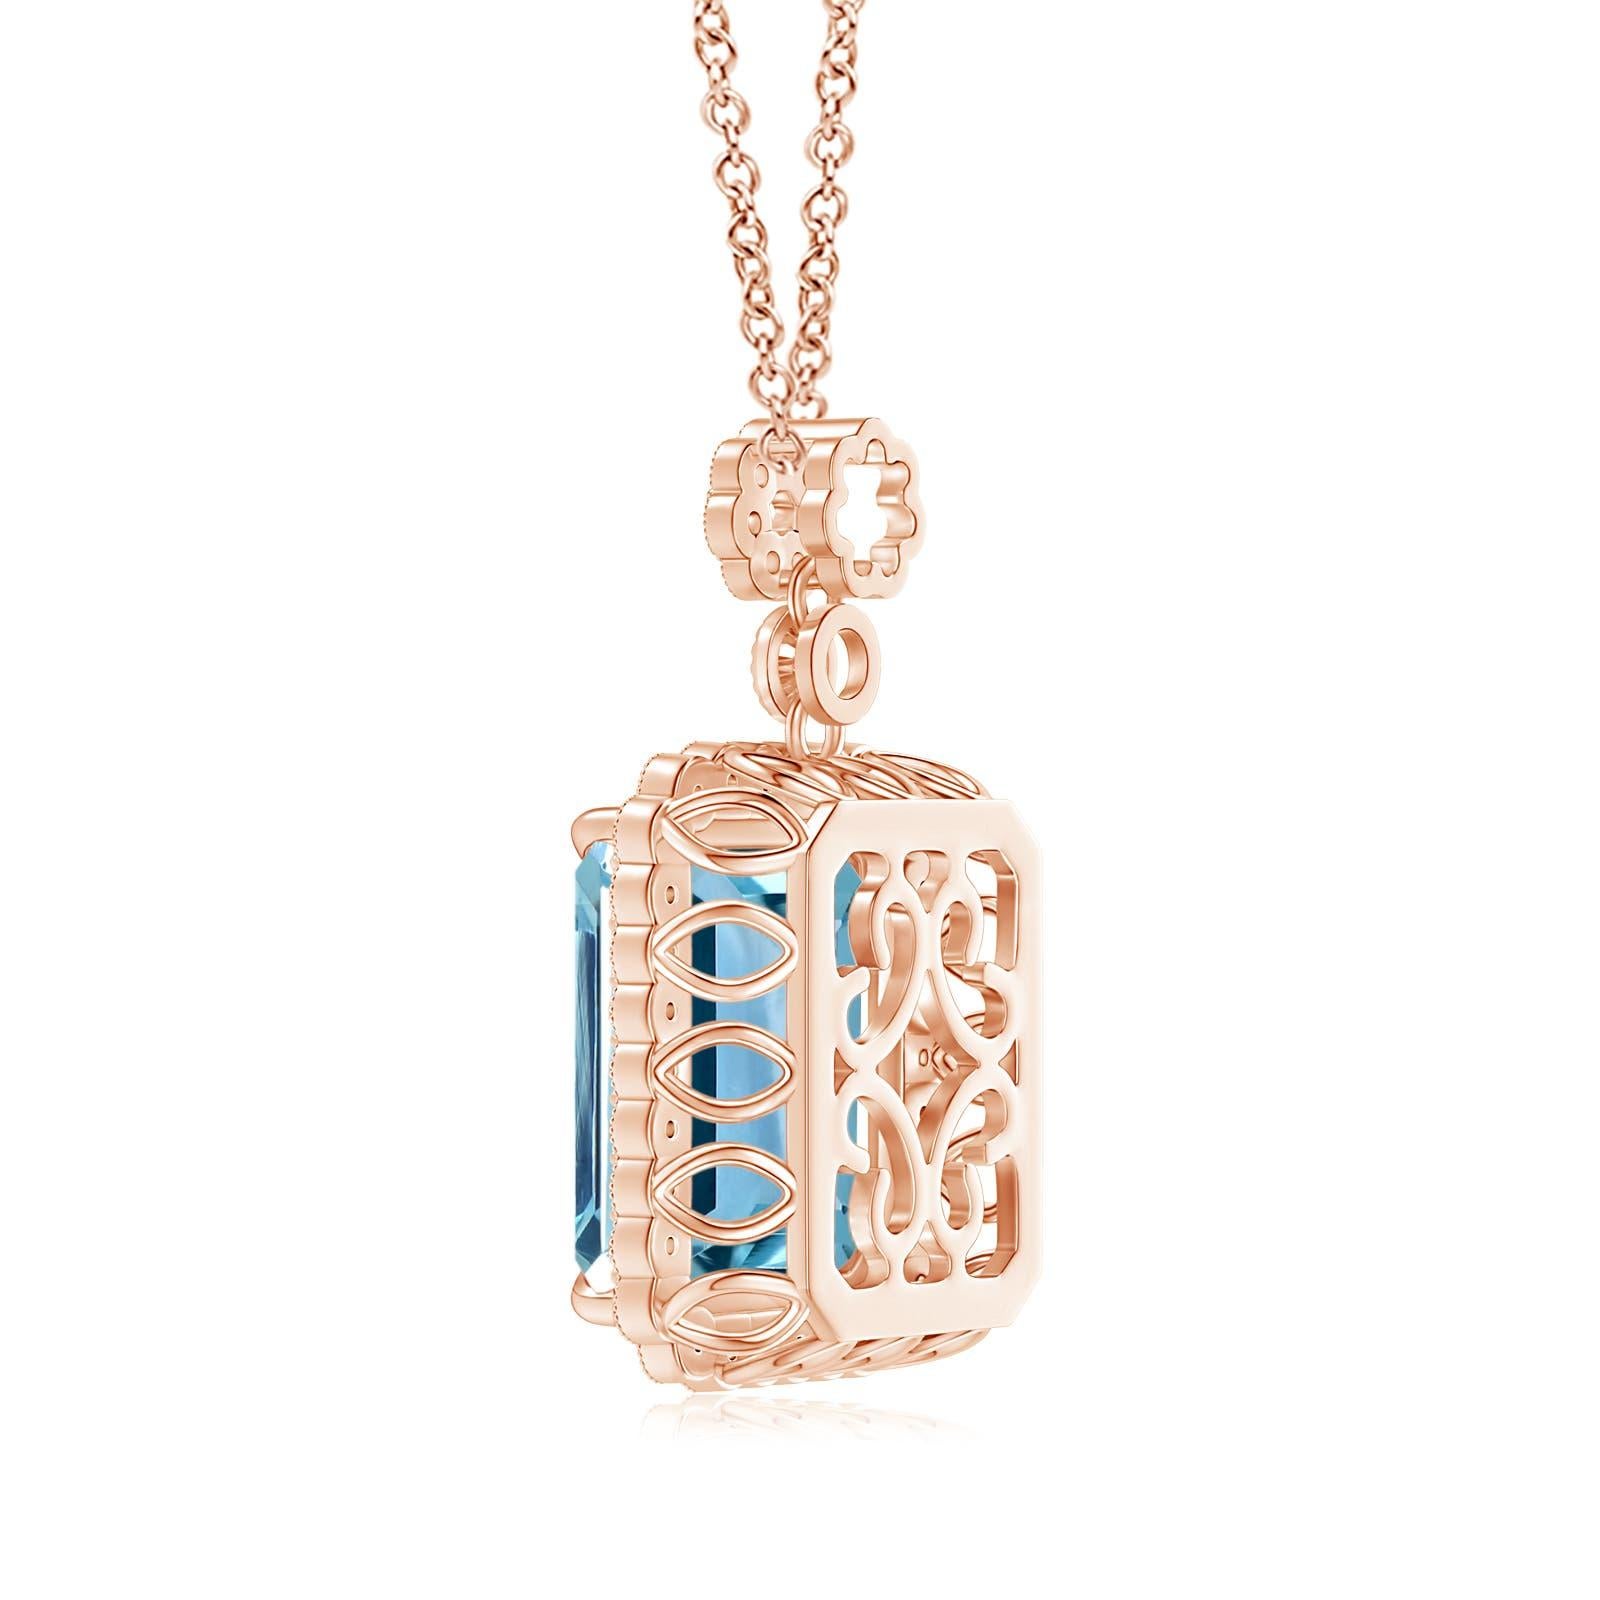 GIA Certified Emerald cut Aquamarine Pendant with Floral Bale
